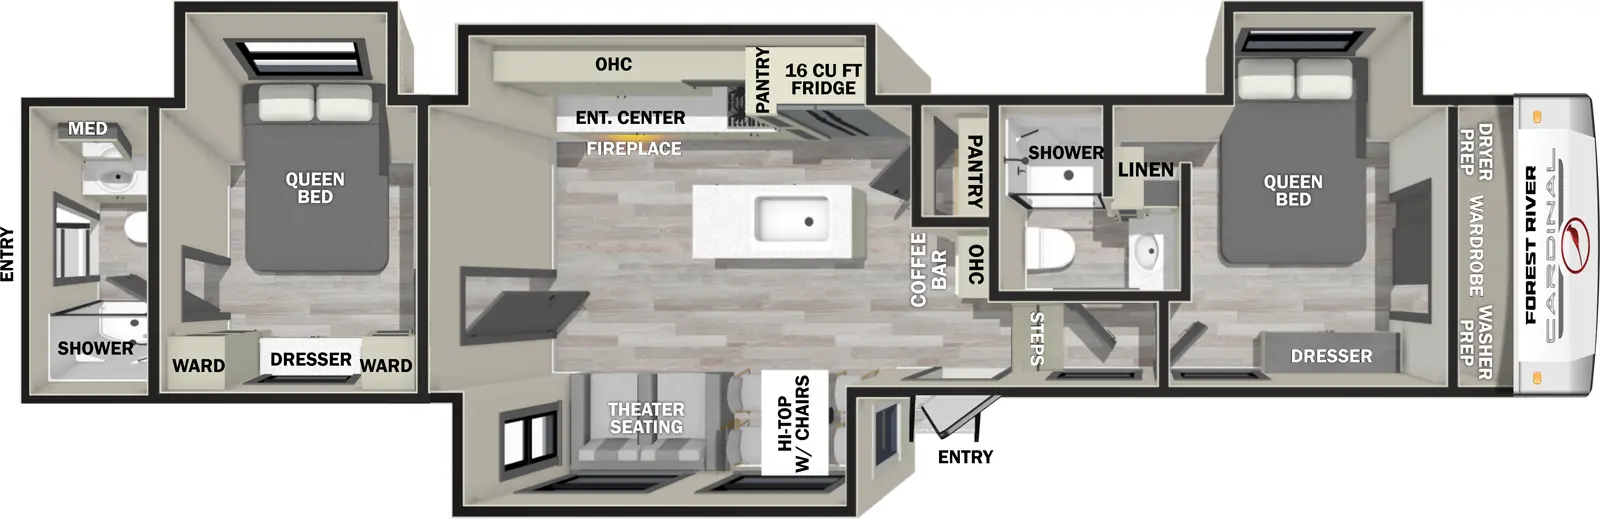 The 402BEDS has four slideouts and two entries. Interior layout front to back: wardrobe, off-door side queen bed slideout and linen closet, and door side dresser; off-door side full bathroom; steps down to main living area and entry; coffee bar with overhead cabinet and pantry along inner wall; off-door side slideout with refrigerator, pantry, kitchen counter with cooktop, overhead cabinet, and entertainment center with fireplace; kitchen island with sink; door side slideout with hi-top with chairs, and theater seating; bedroom with off-door side queen bed slideout, and door side dresser with wardrobes on each side; rear full bathroom with medicine cabinet and rear second entry.